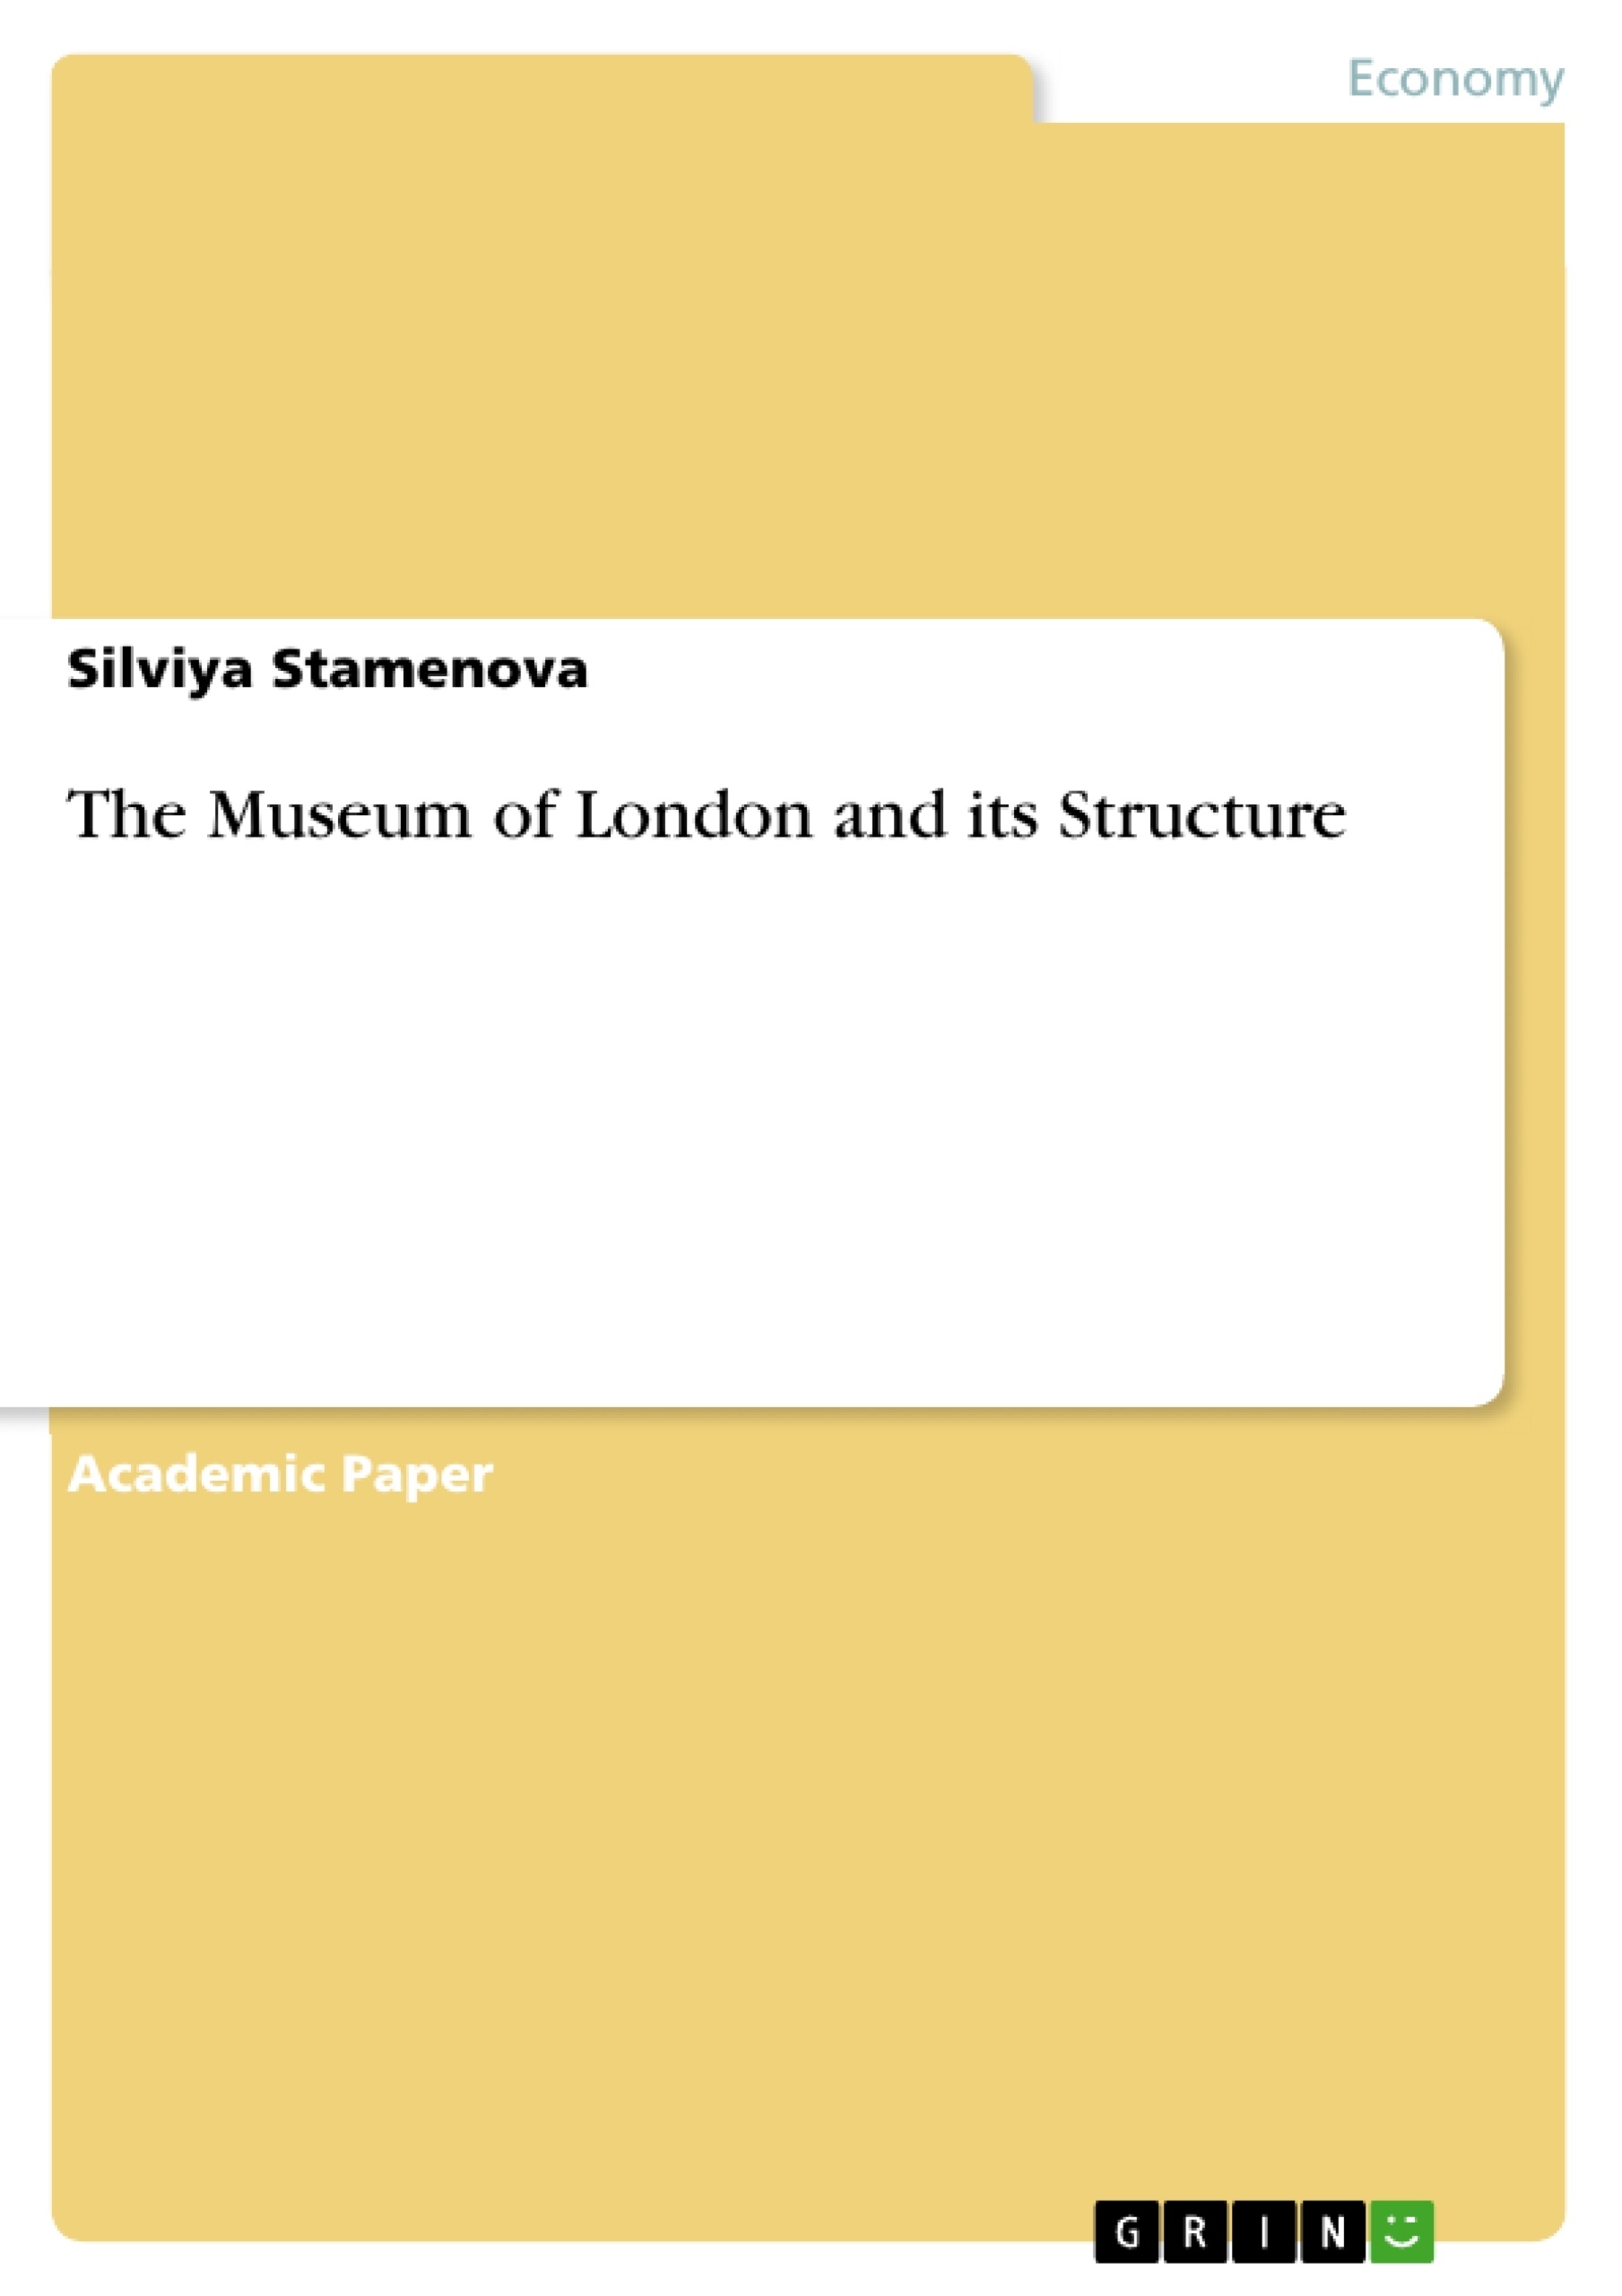 Título: The Museum of London and its Structure